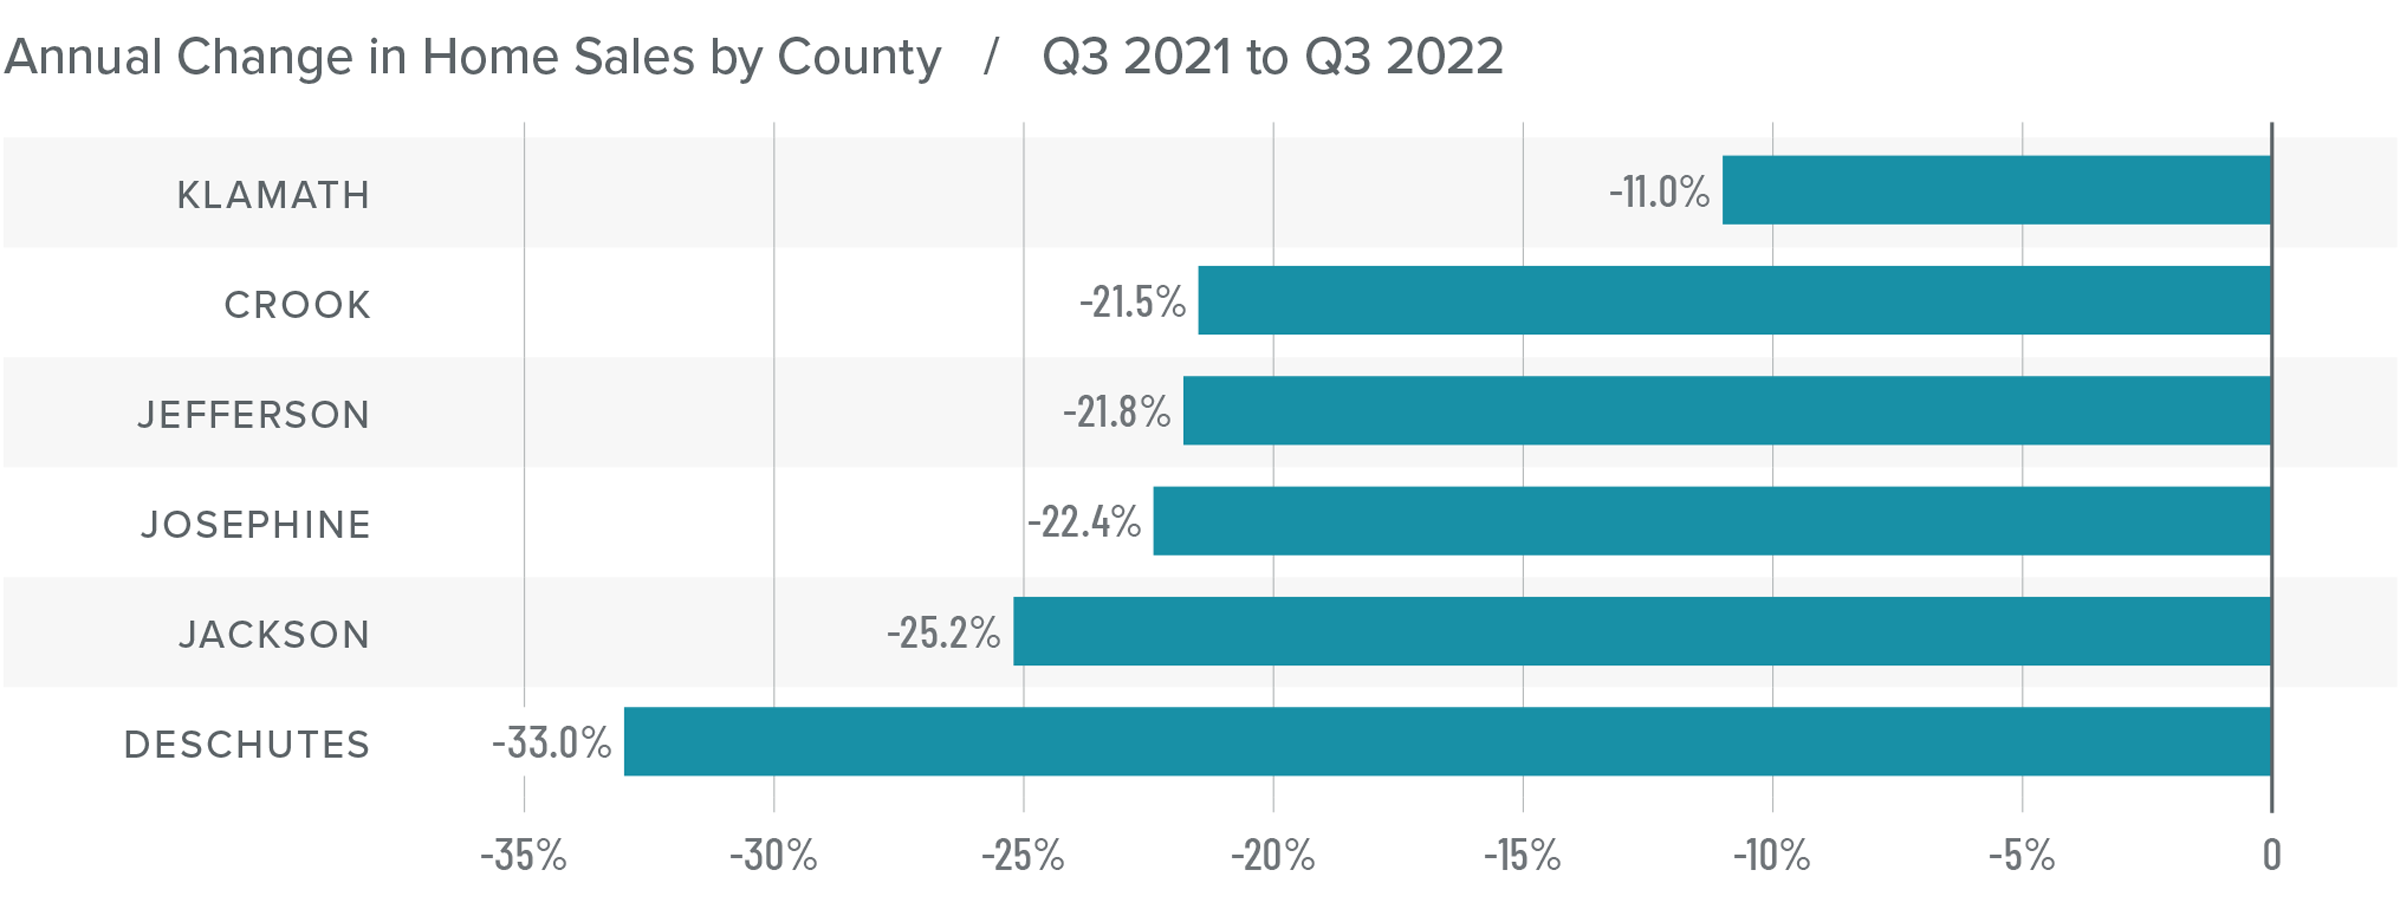 A bar graph showing the annual change in home sales for various counties in Central and Southern Oregon from Q3 2021 to Q3 2022. All counties have a negative percentage year-over-year change. Klamath tops the list at -11%, followed by Crook at -21.5%, Jefferson -21.8%, Josephine -22.4%, Jackson -25.2%, and Deschutes -33%.